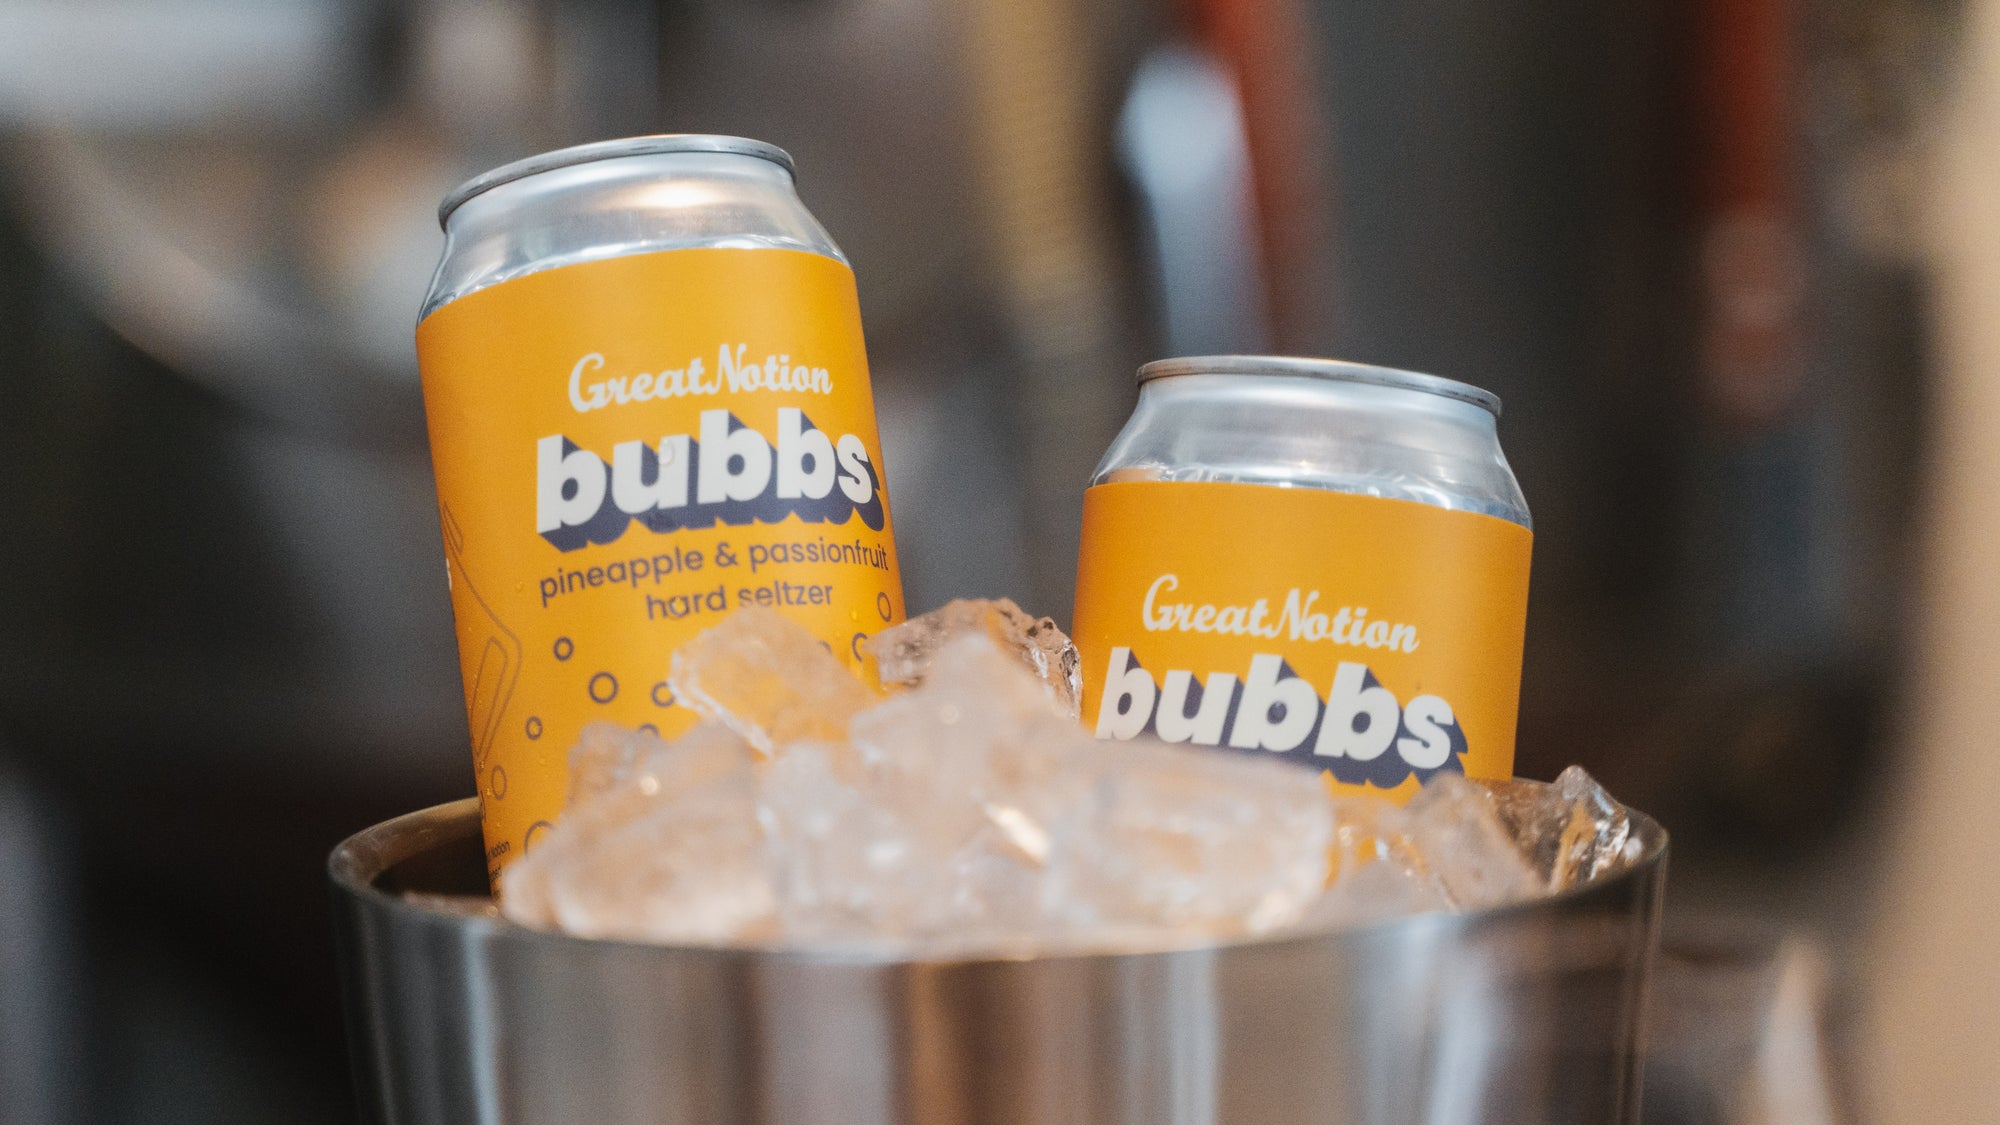 Bubbs (Pineapple & Passionfruit)